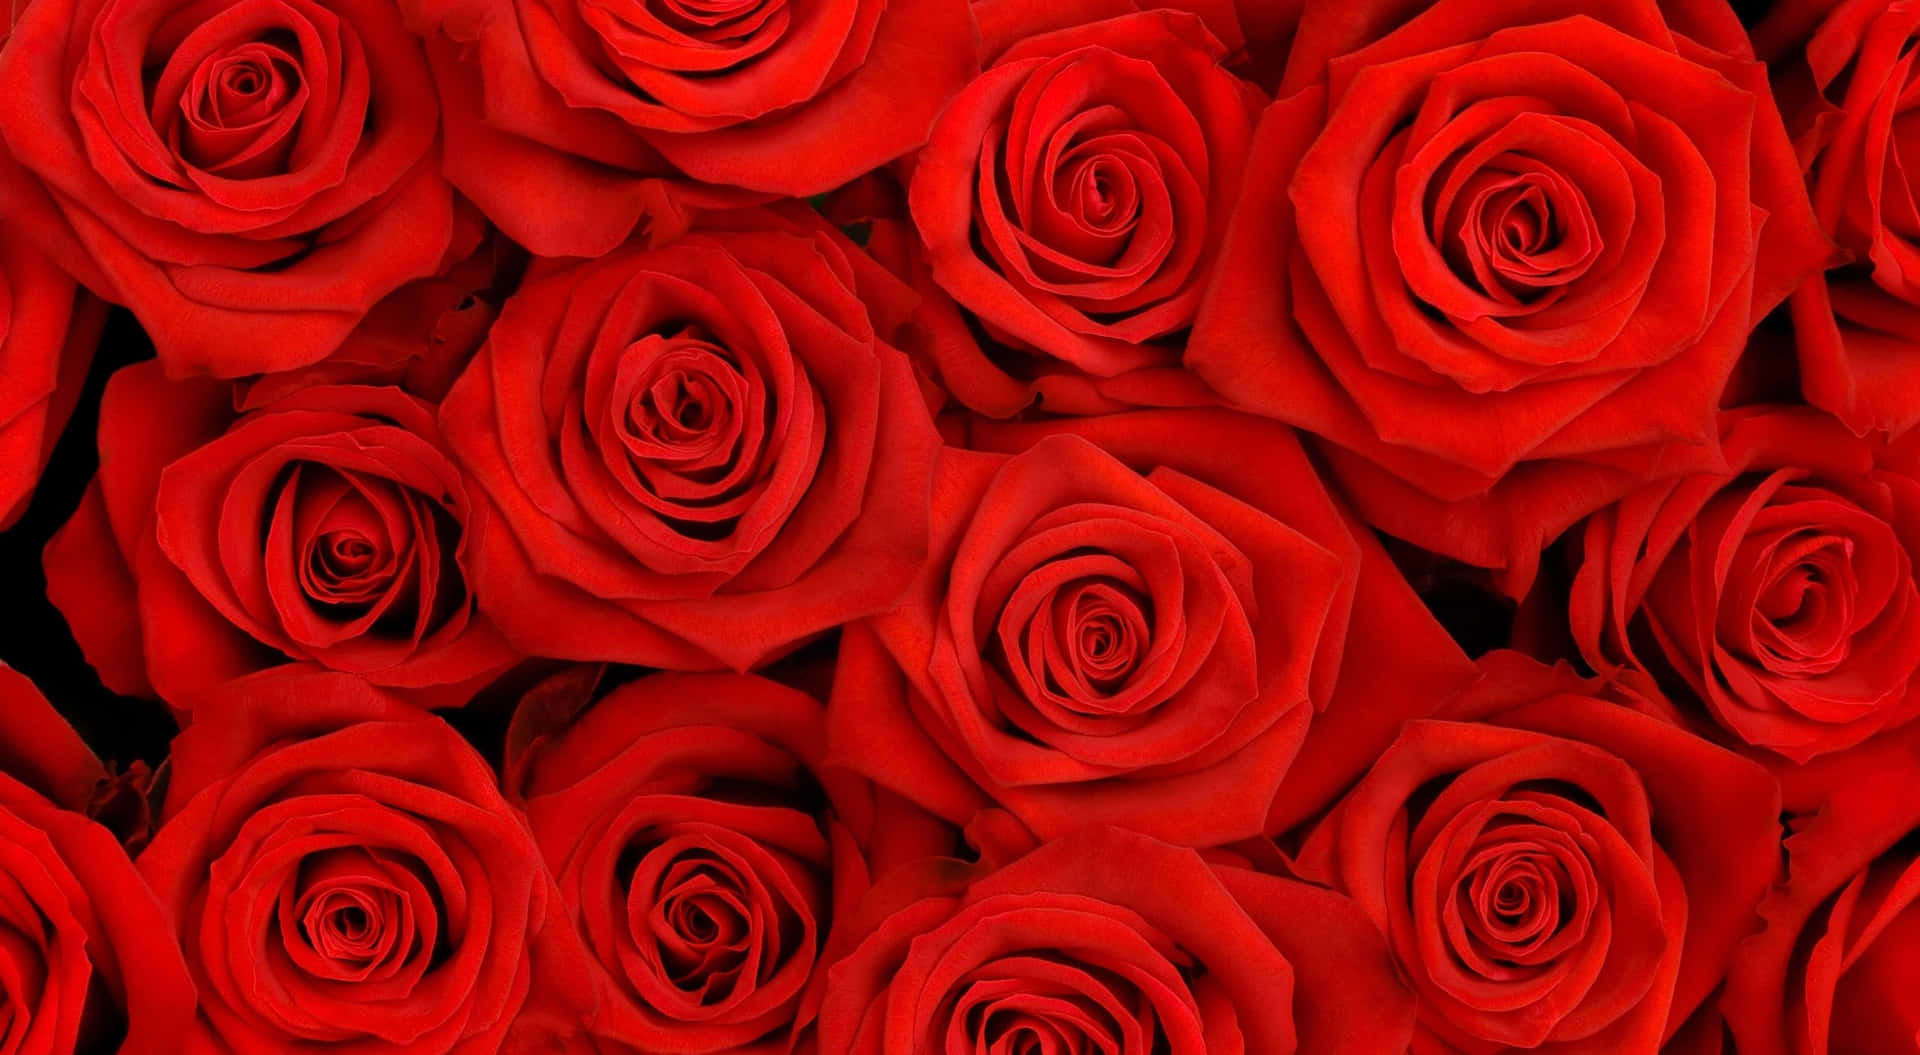 1440p Bright Red Roses Top View Shot Background